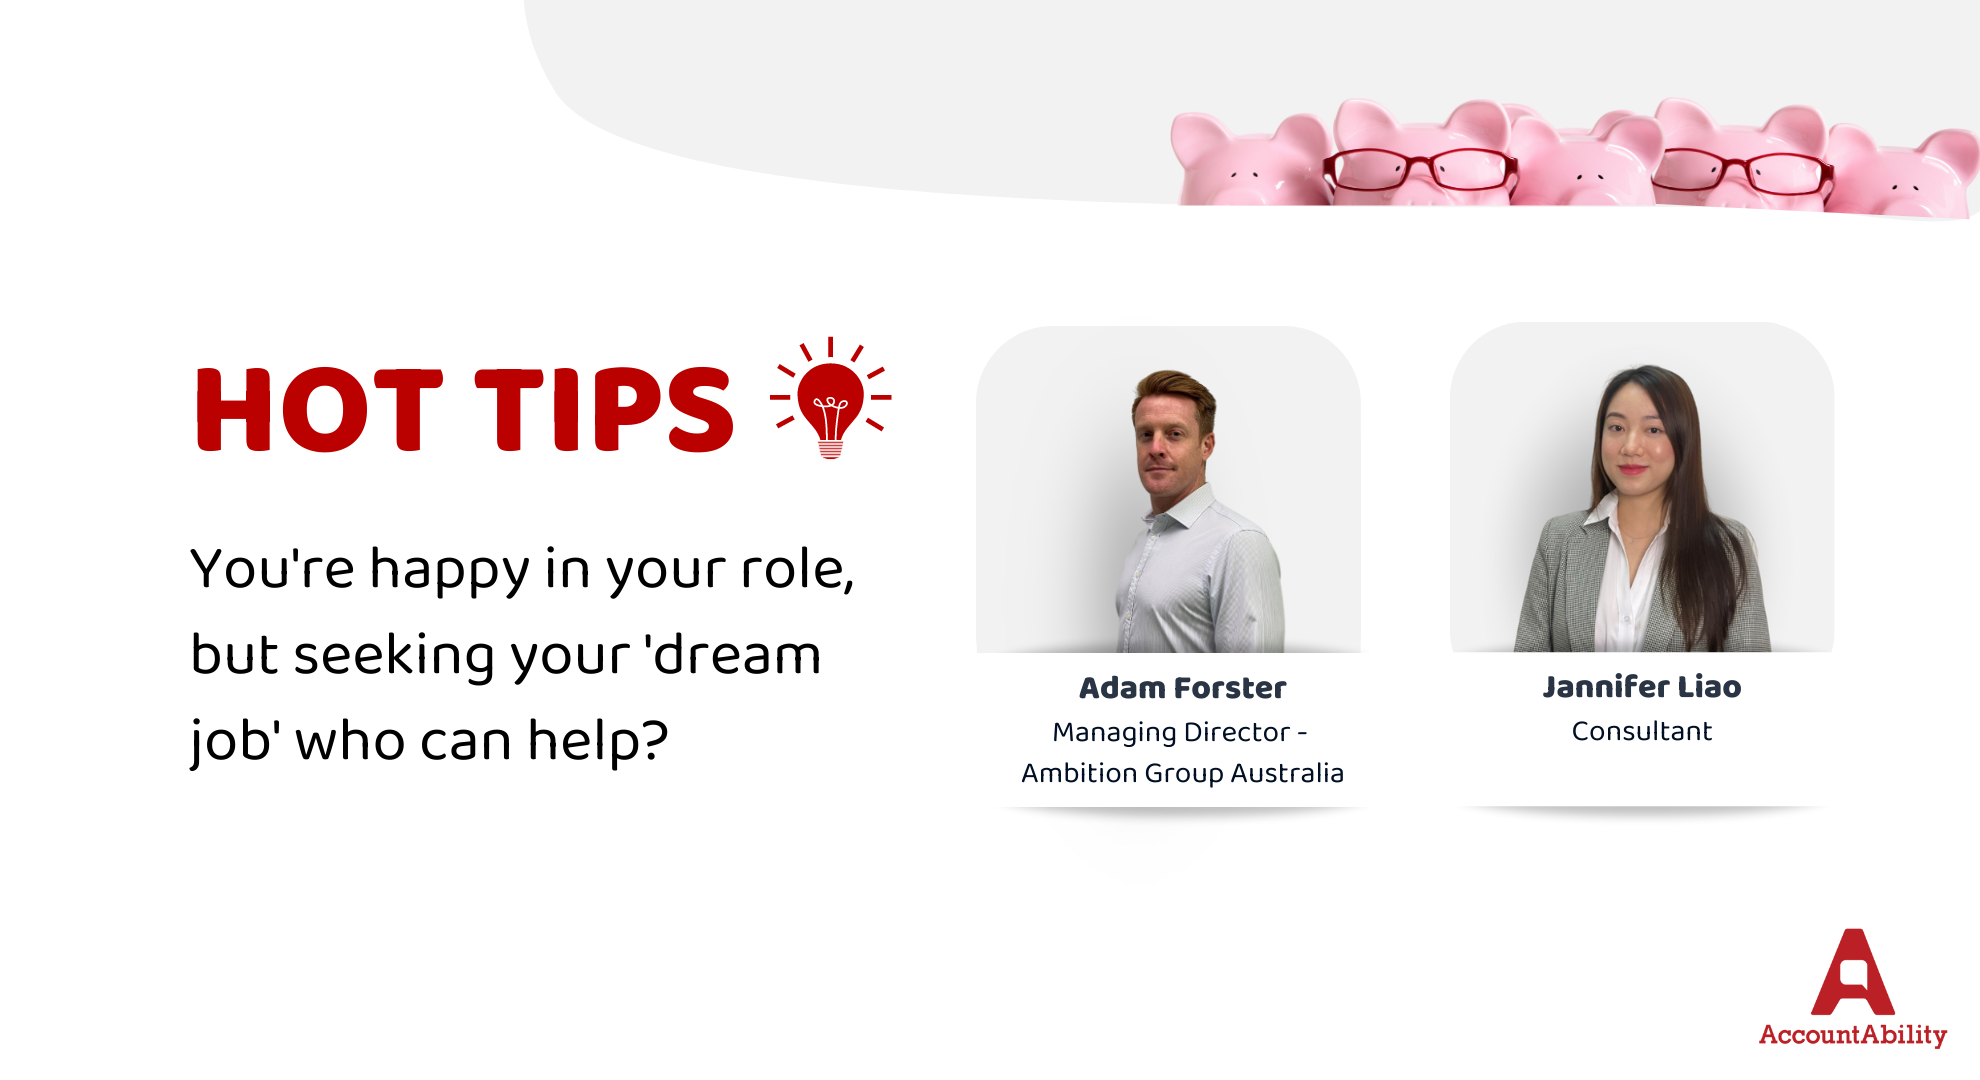 You're happy in your role but seeking your 'dream job' who can help?